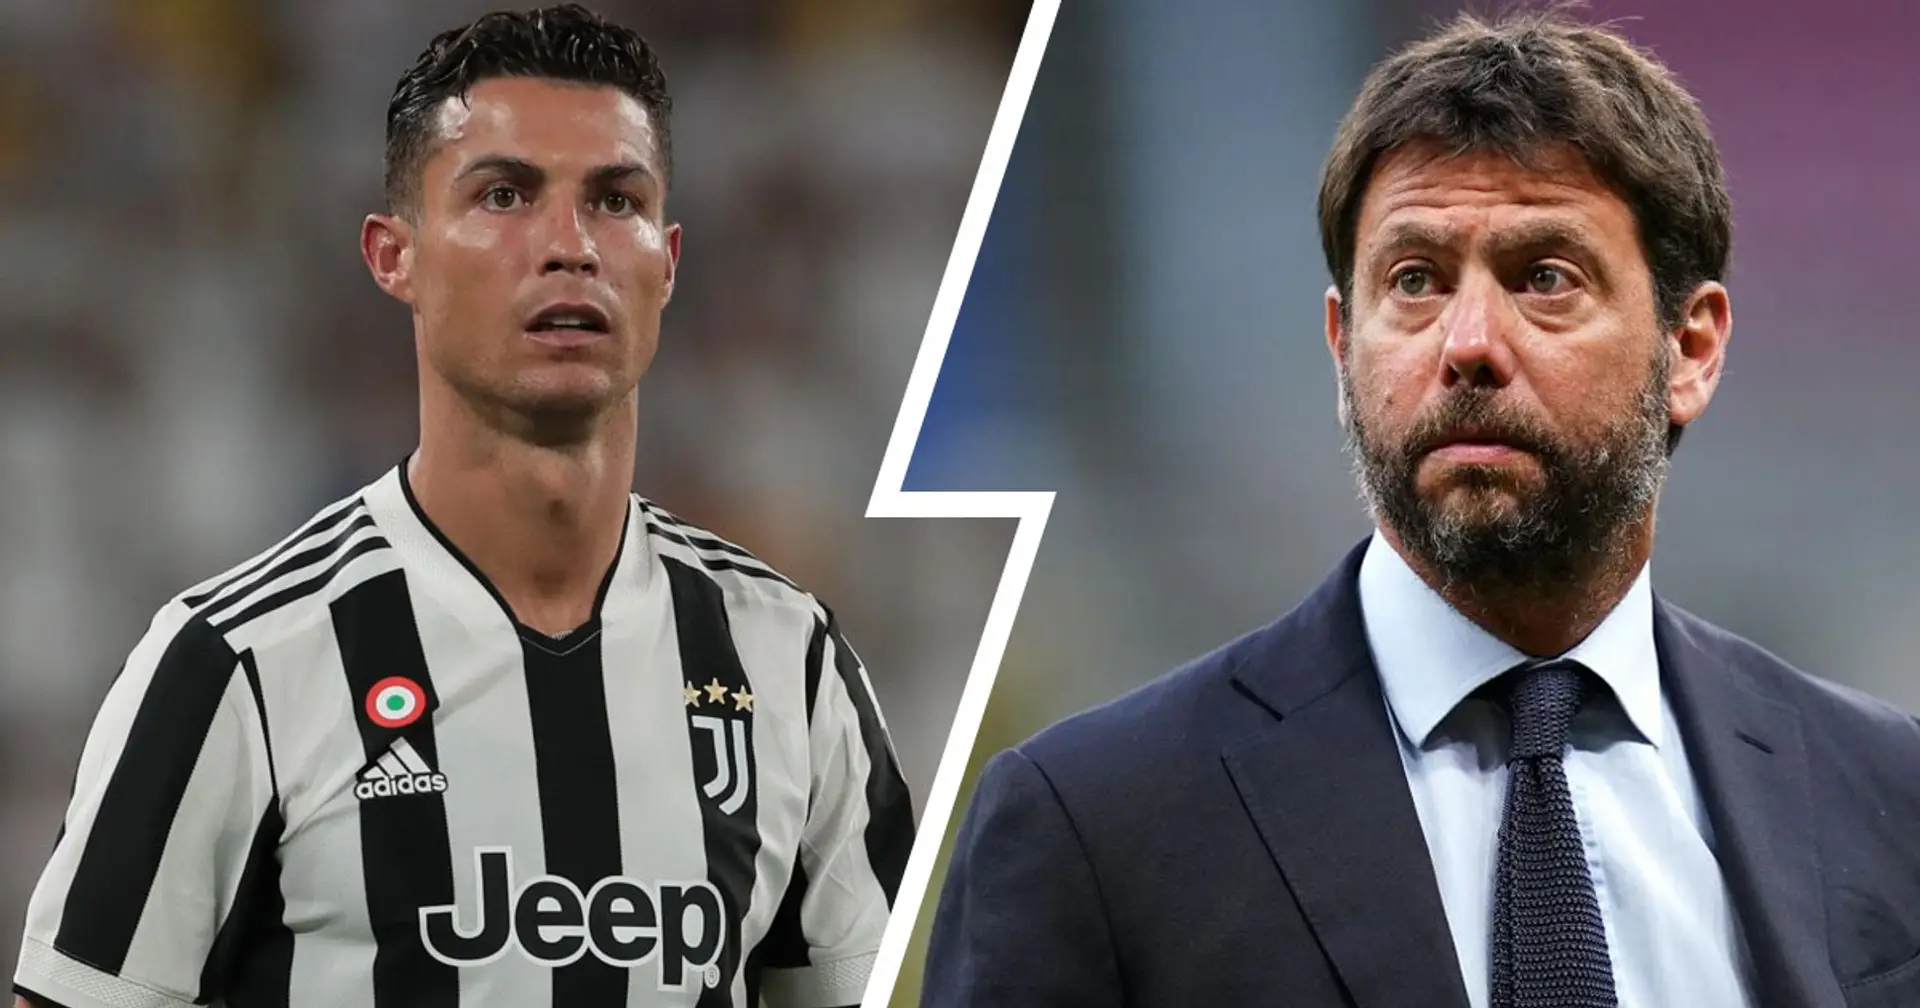 Ronaldo could face questioning from Italian authorities for striking ‘secret agreement’ with Juventus